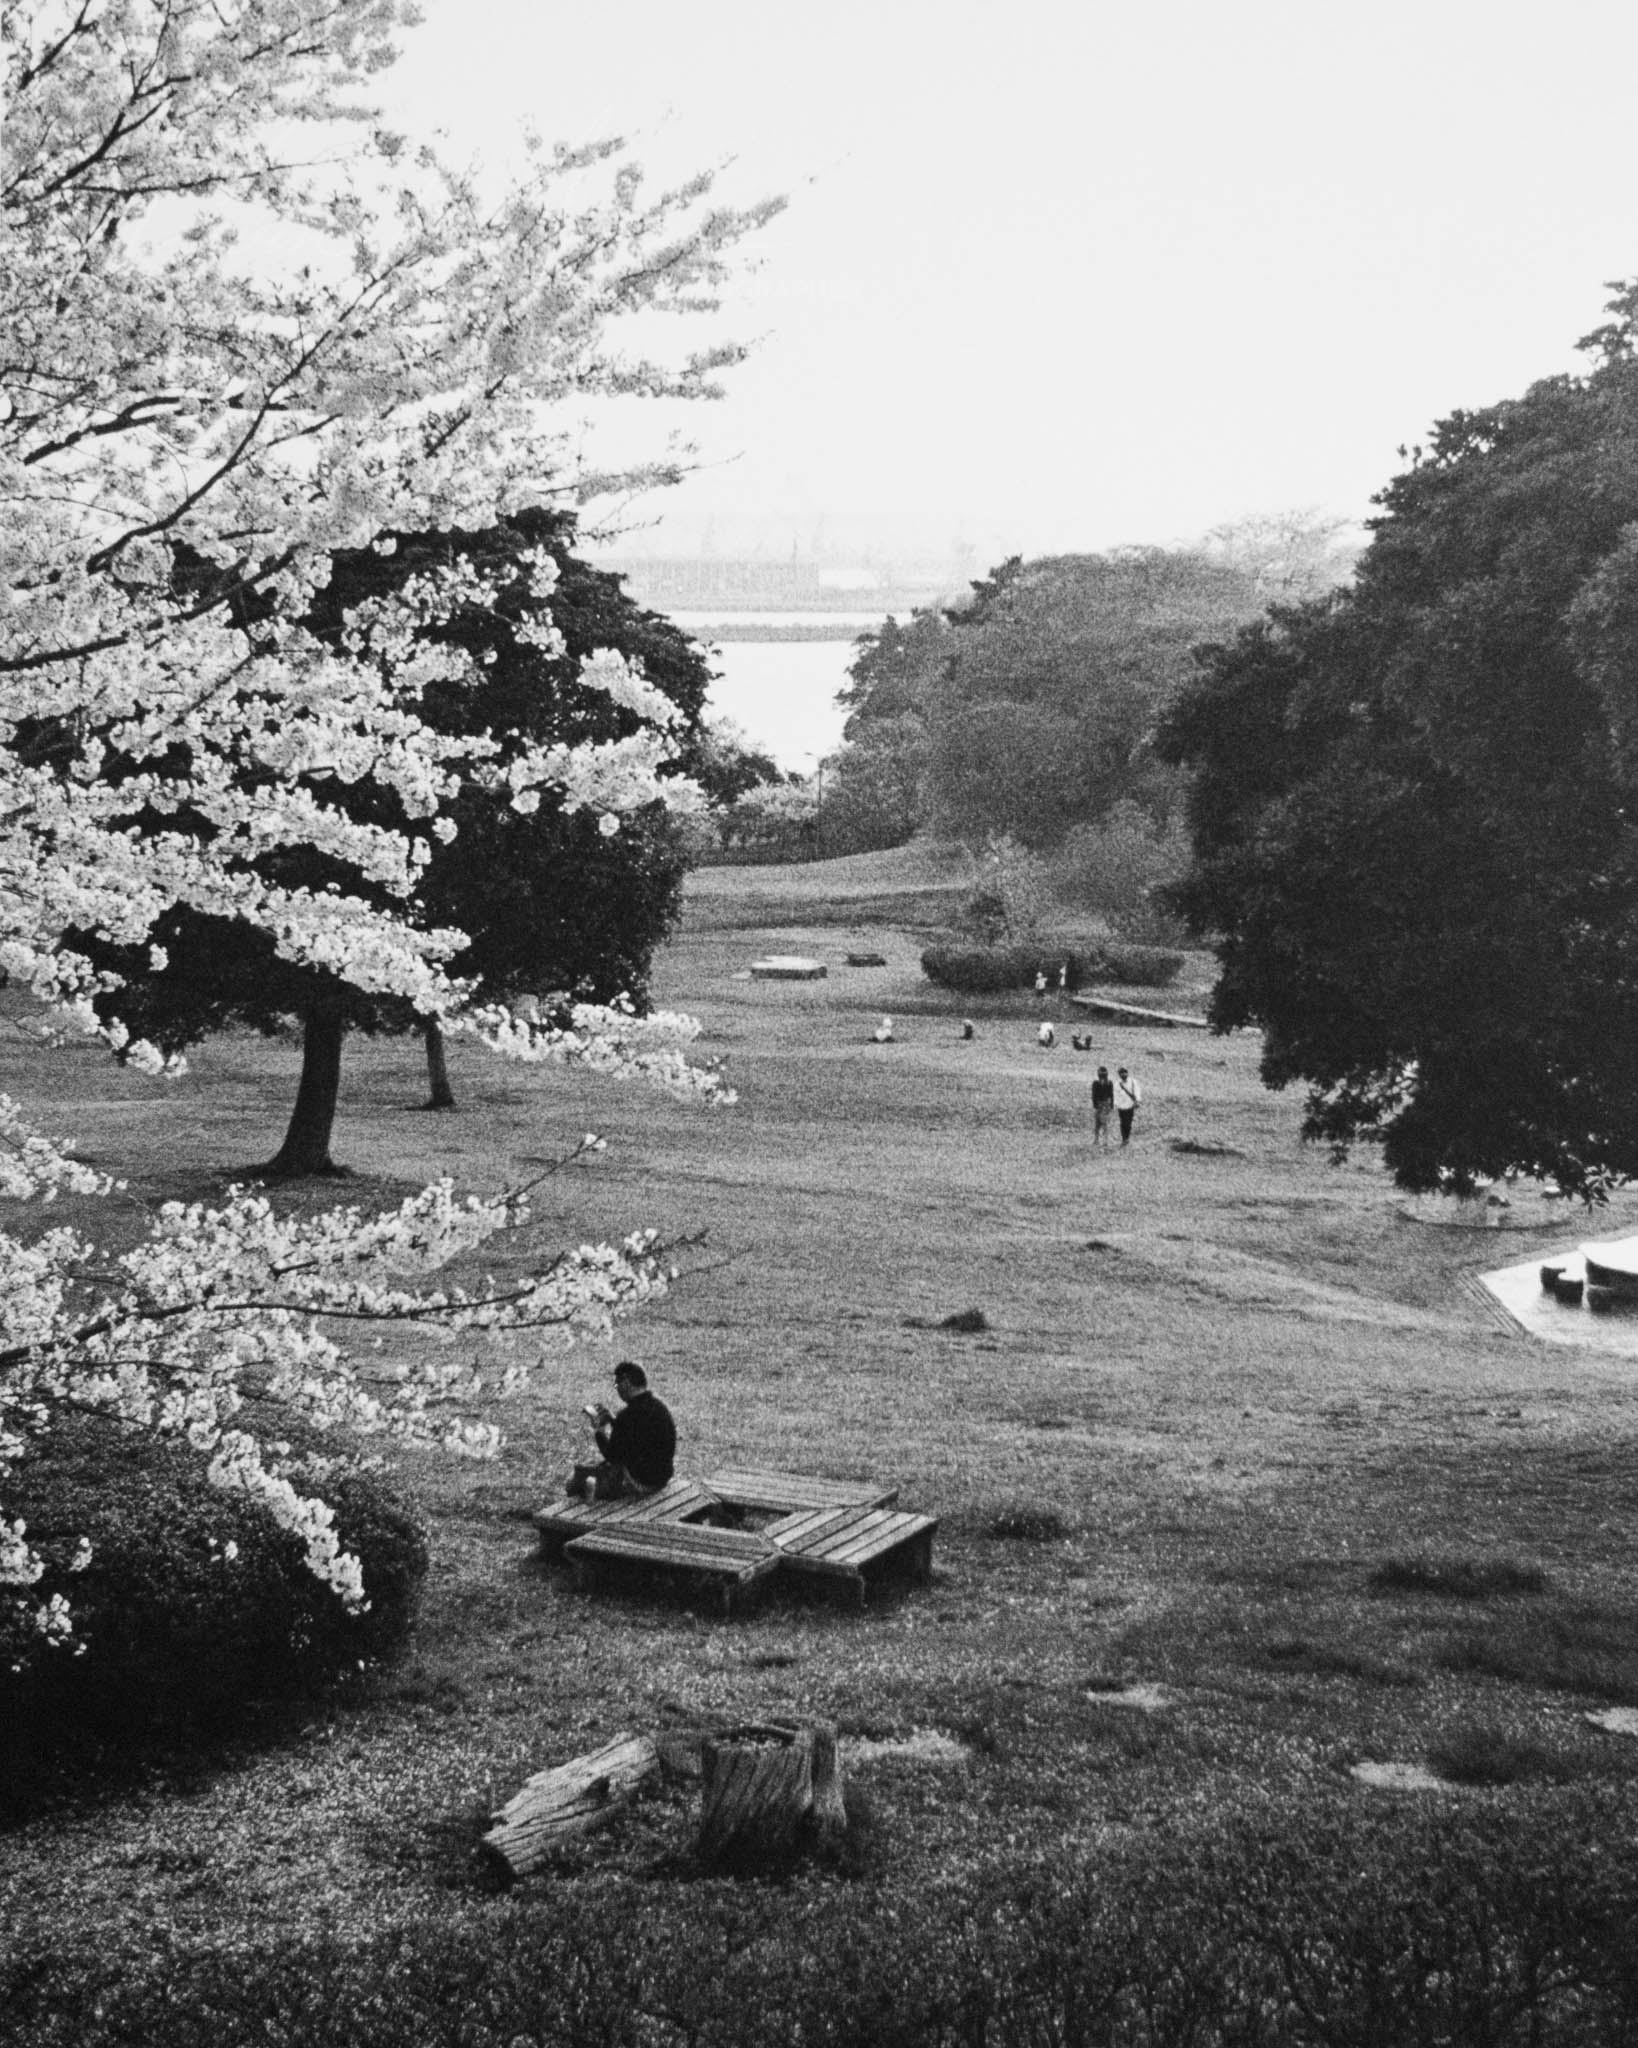 Vintage black and white image of a tranquil park with blooming trees and relaxed visitors.